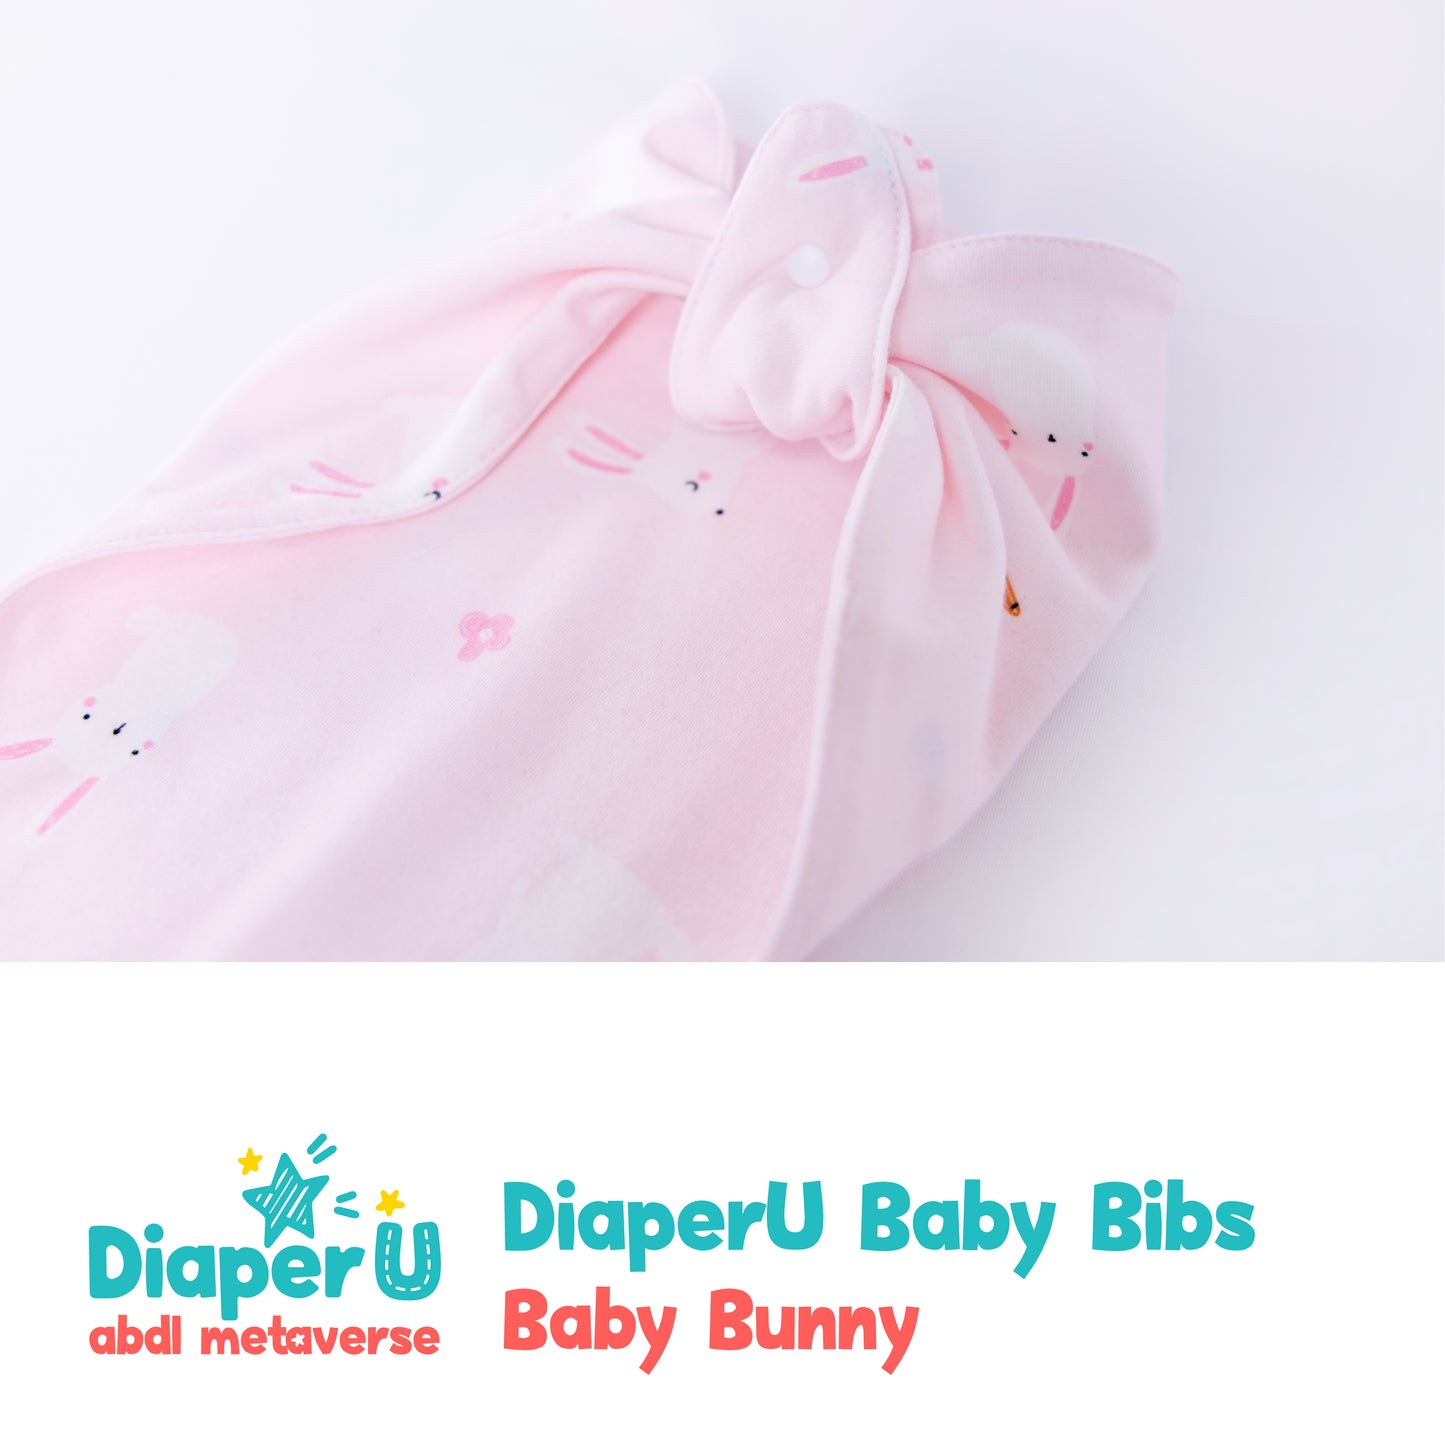 ABDL Baby Bibs - Baby Bunny (Adult Size)